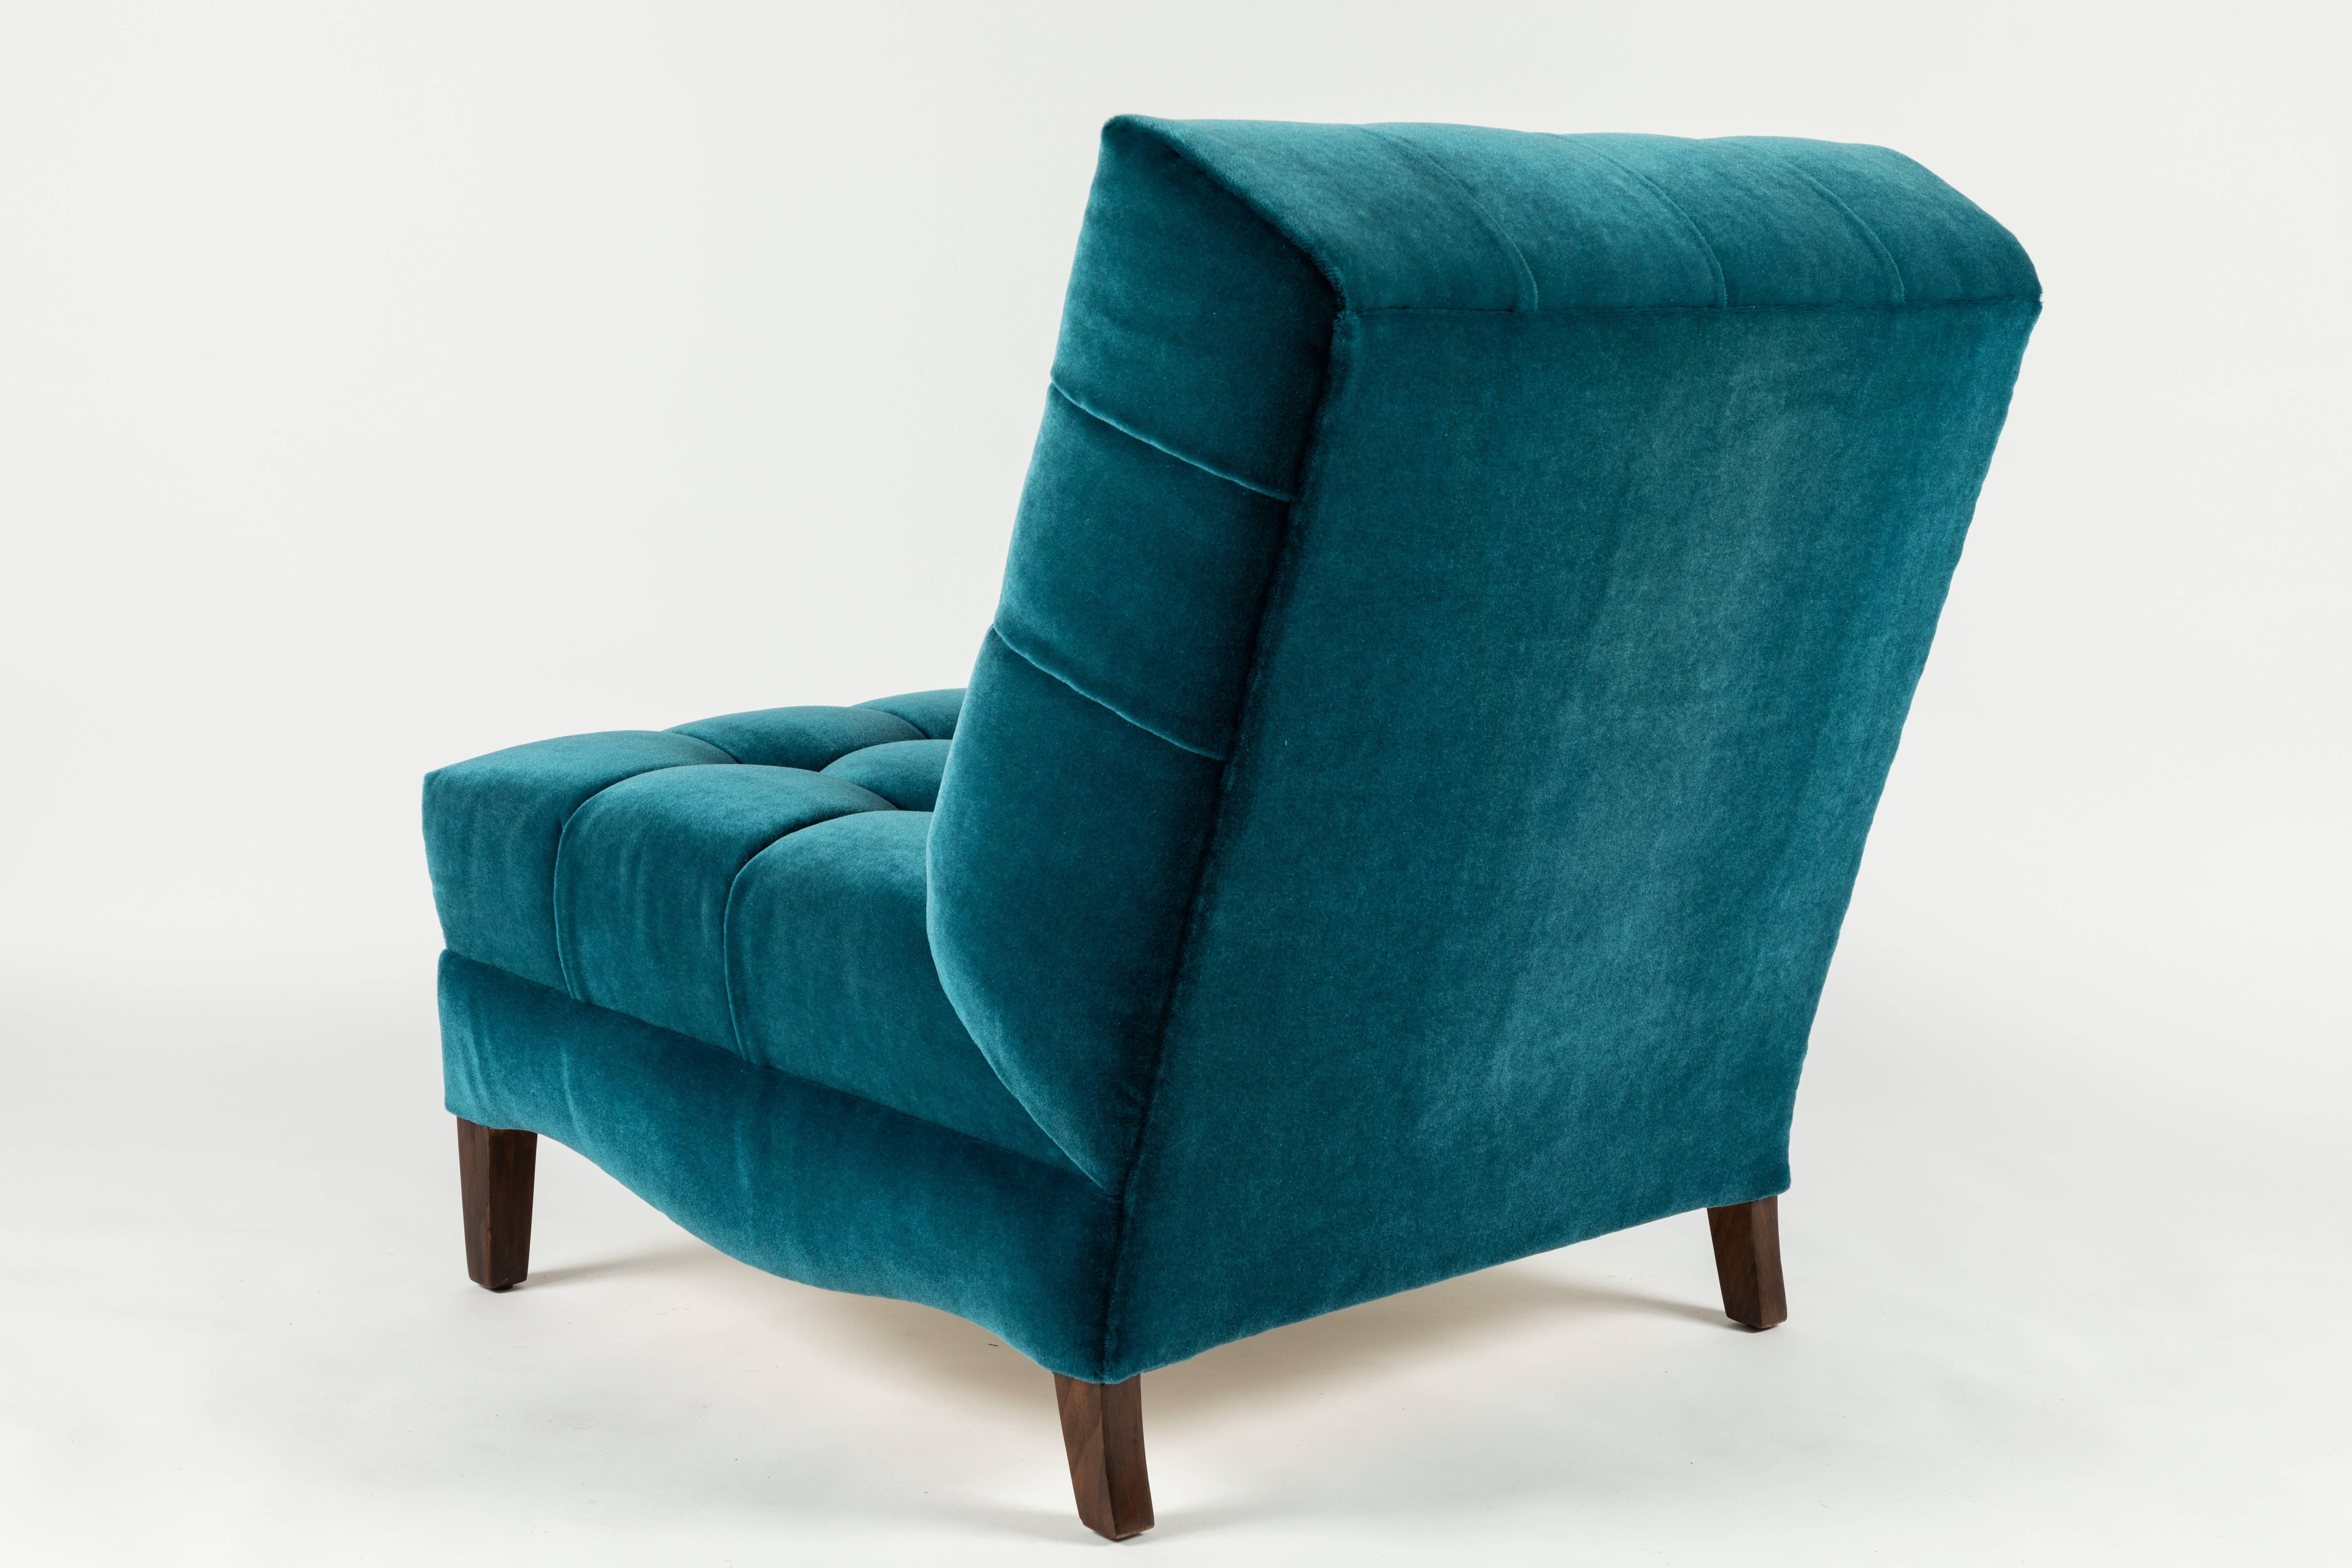 Pair of Biscuit-Tufted Slipper Chairs Covered in Teal Mohair 2